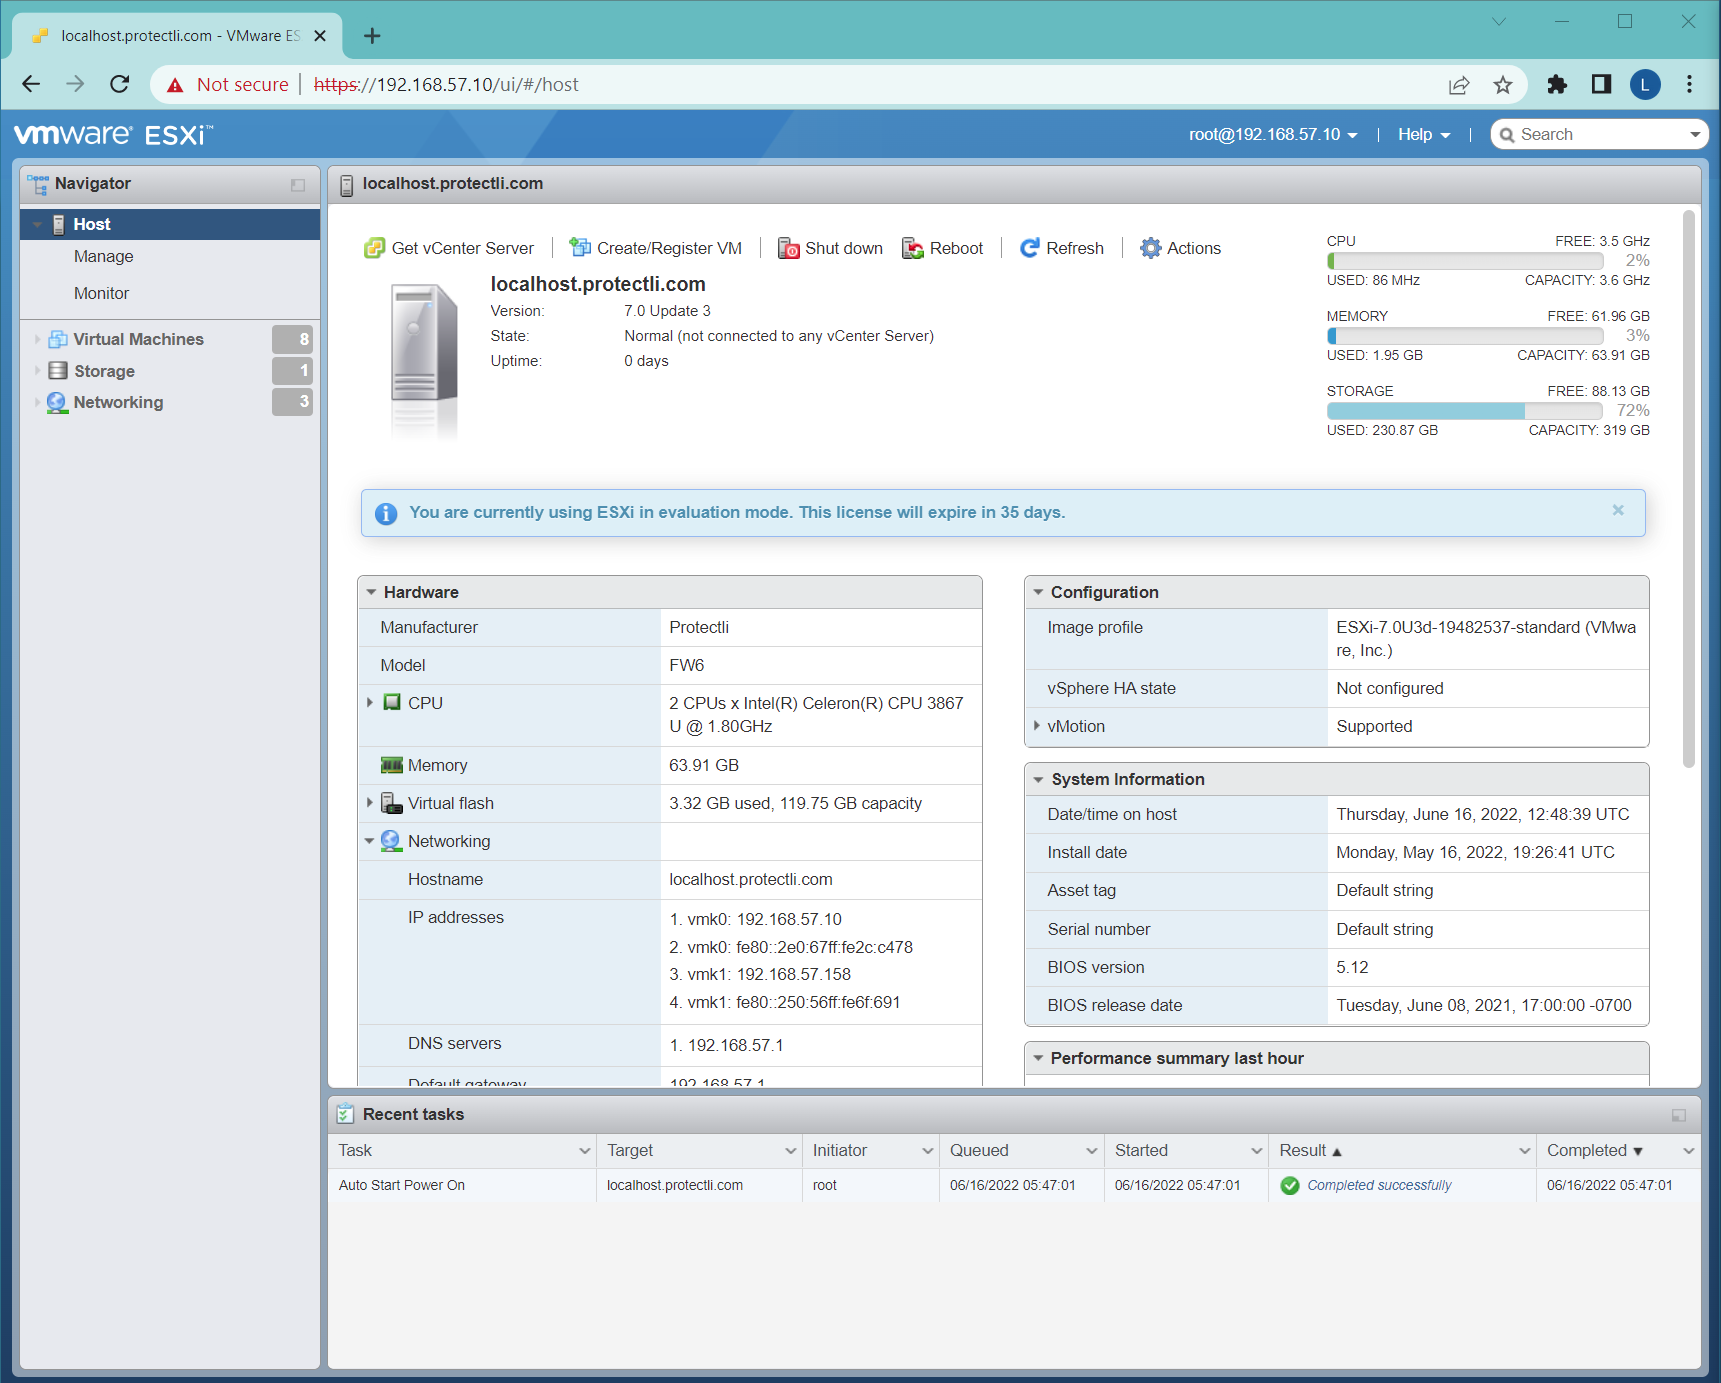 How to install OPNsense in ESXi7 on the Vault